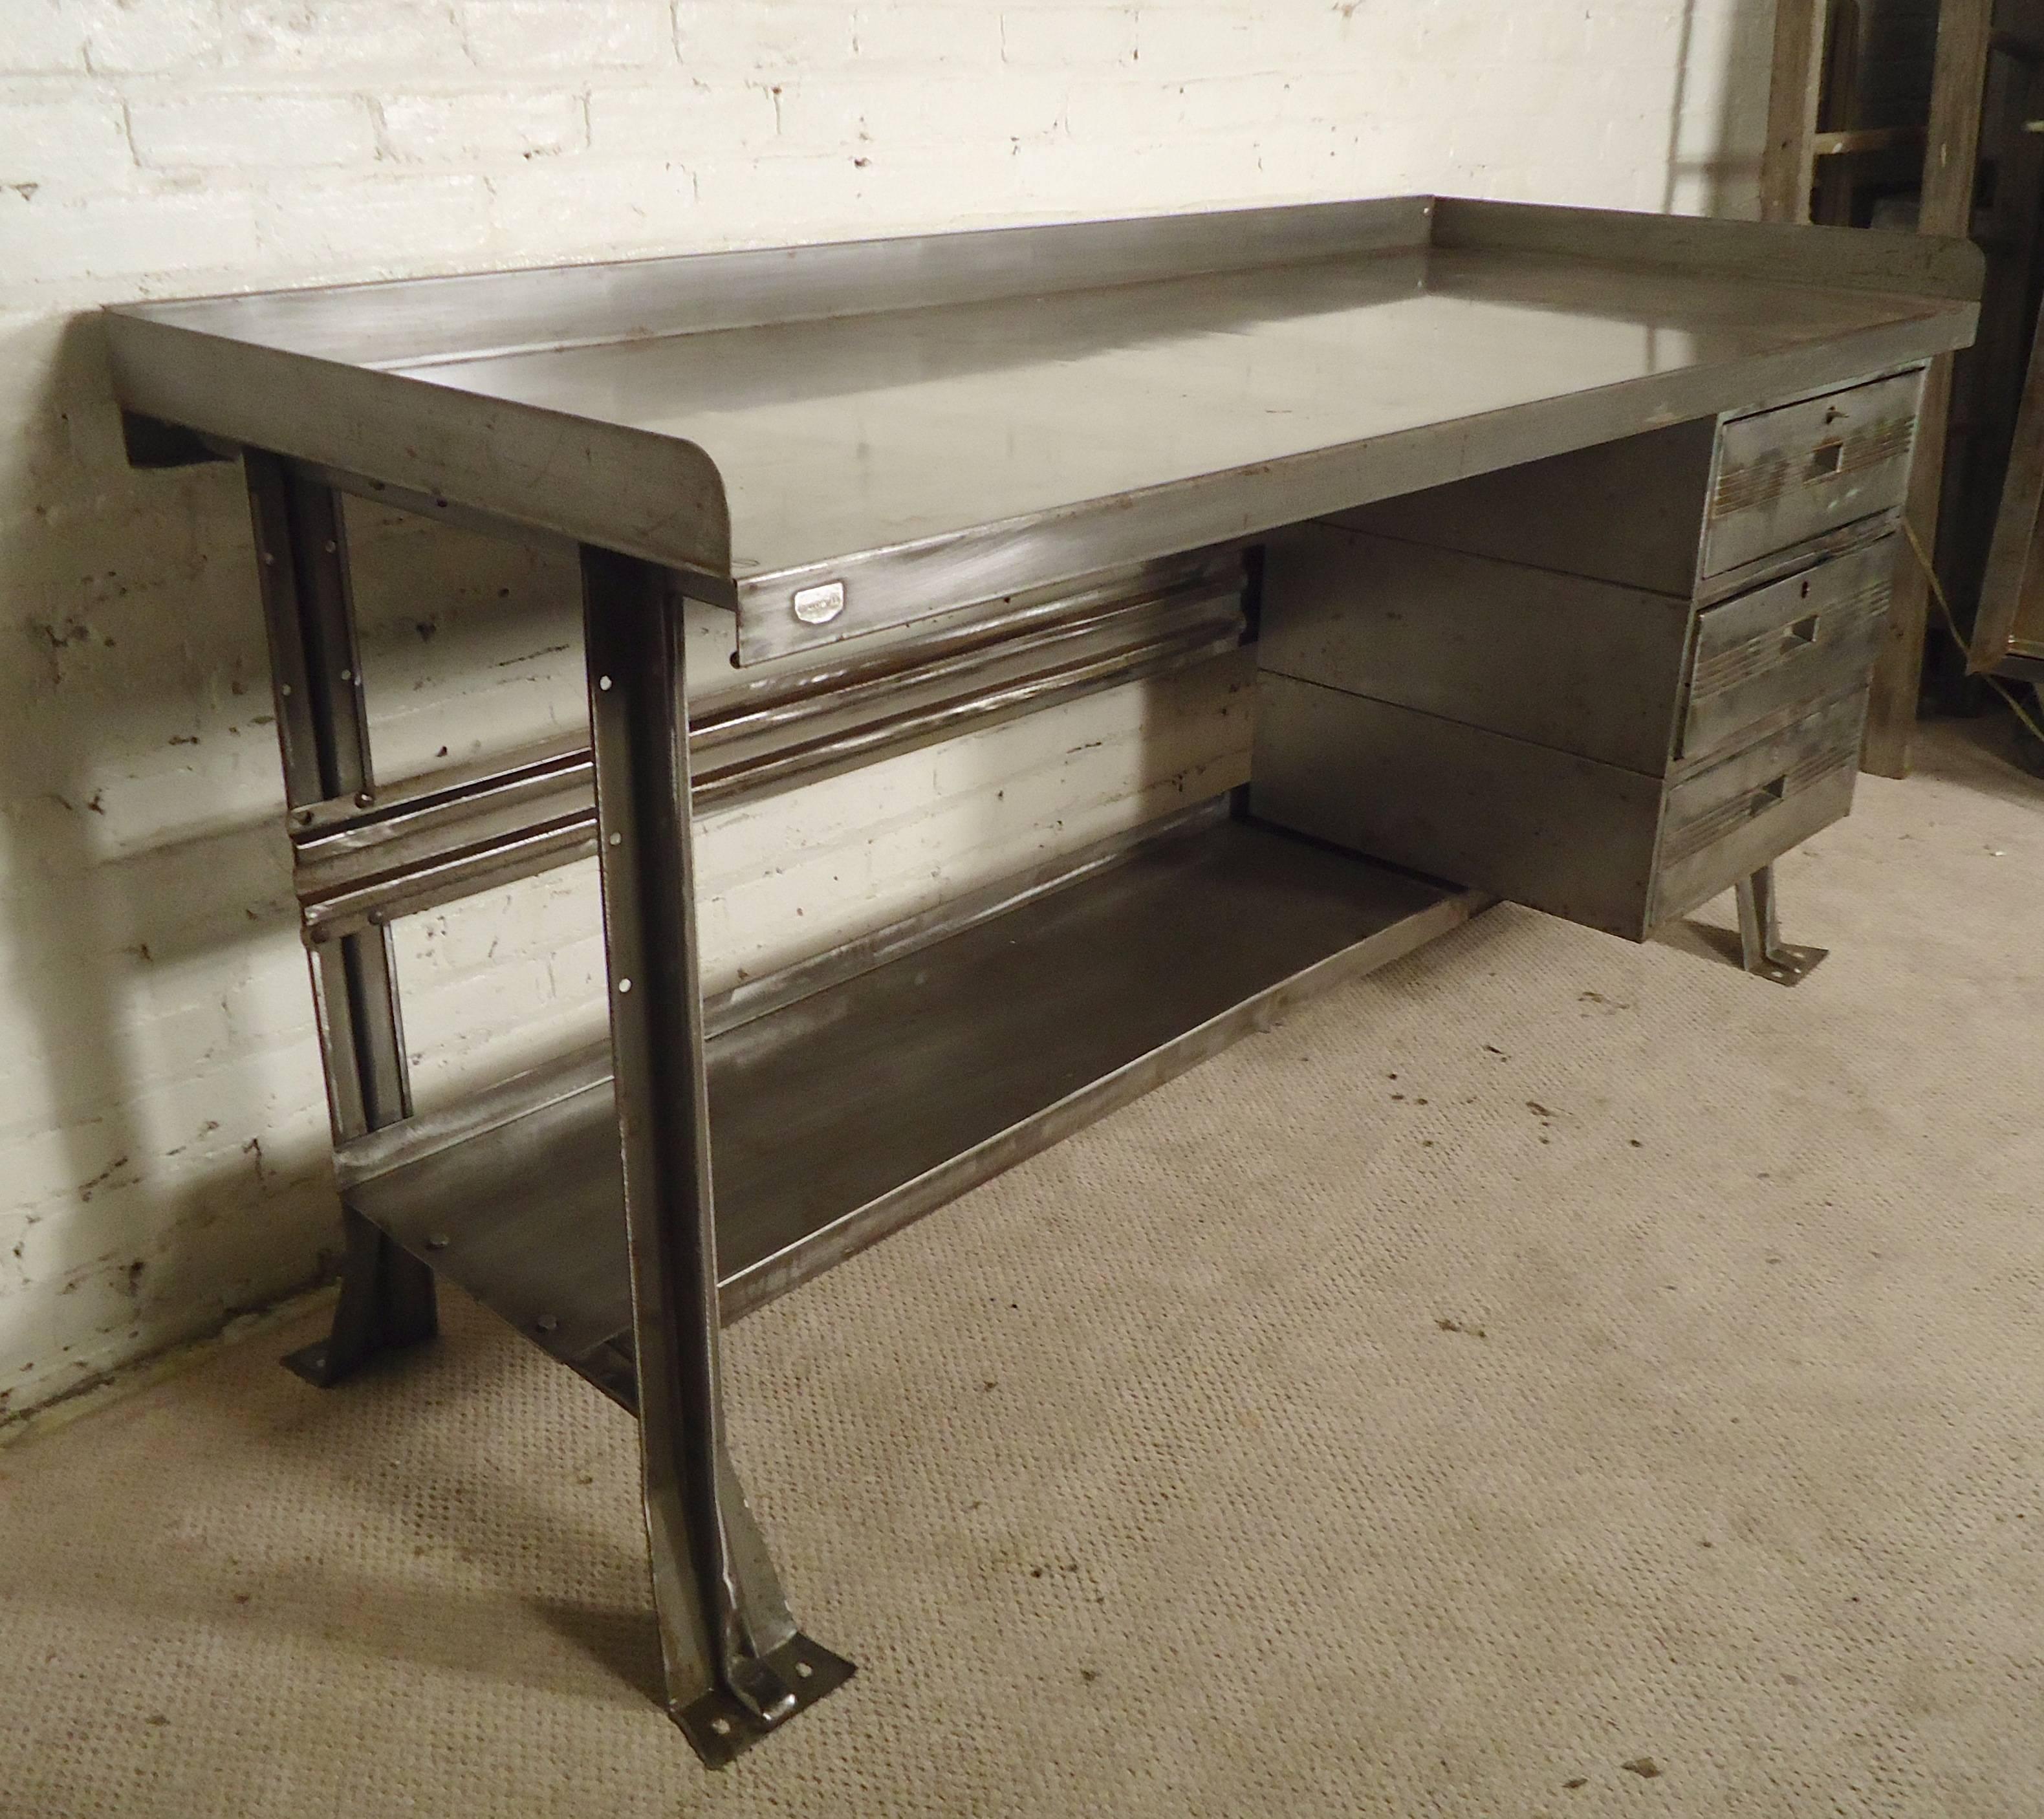 Massive industrial metal artist desk, completely refinished in a bare metal style. Long desk top, three drawers and footrest that can serve as additional storage space. Works with a 27